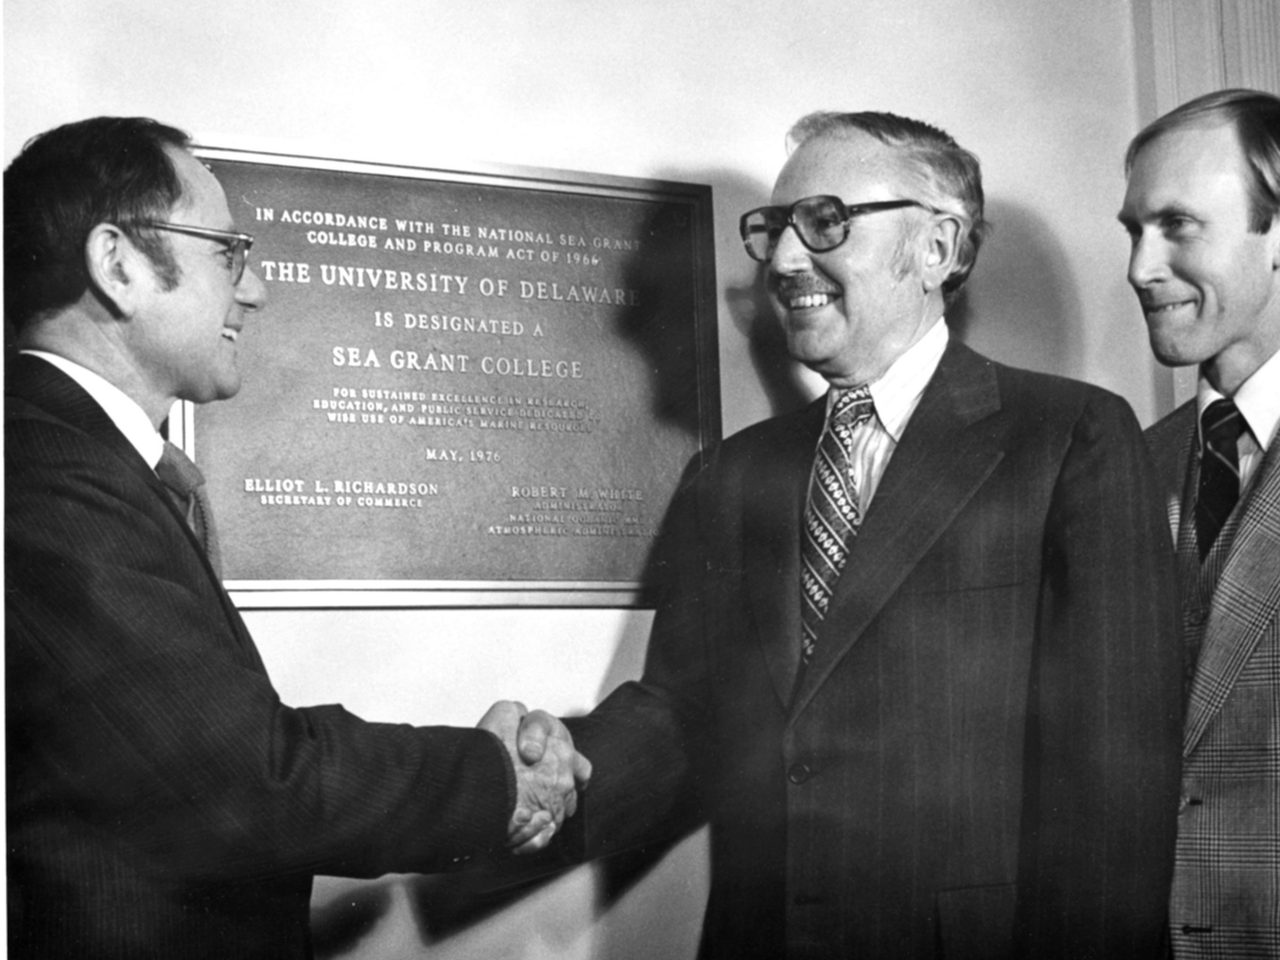 Officials in front of newly installed plaque recognizing UD as a Sea Grant college (1976)